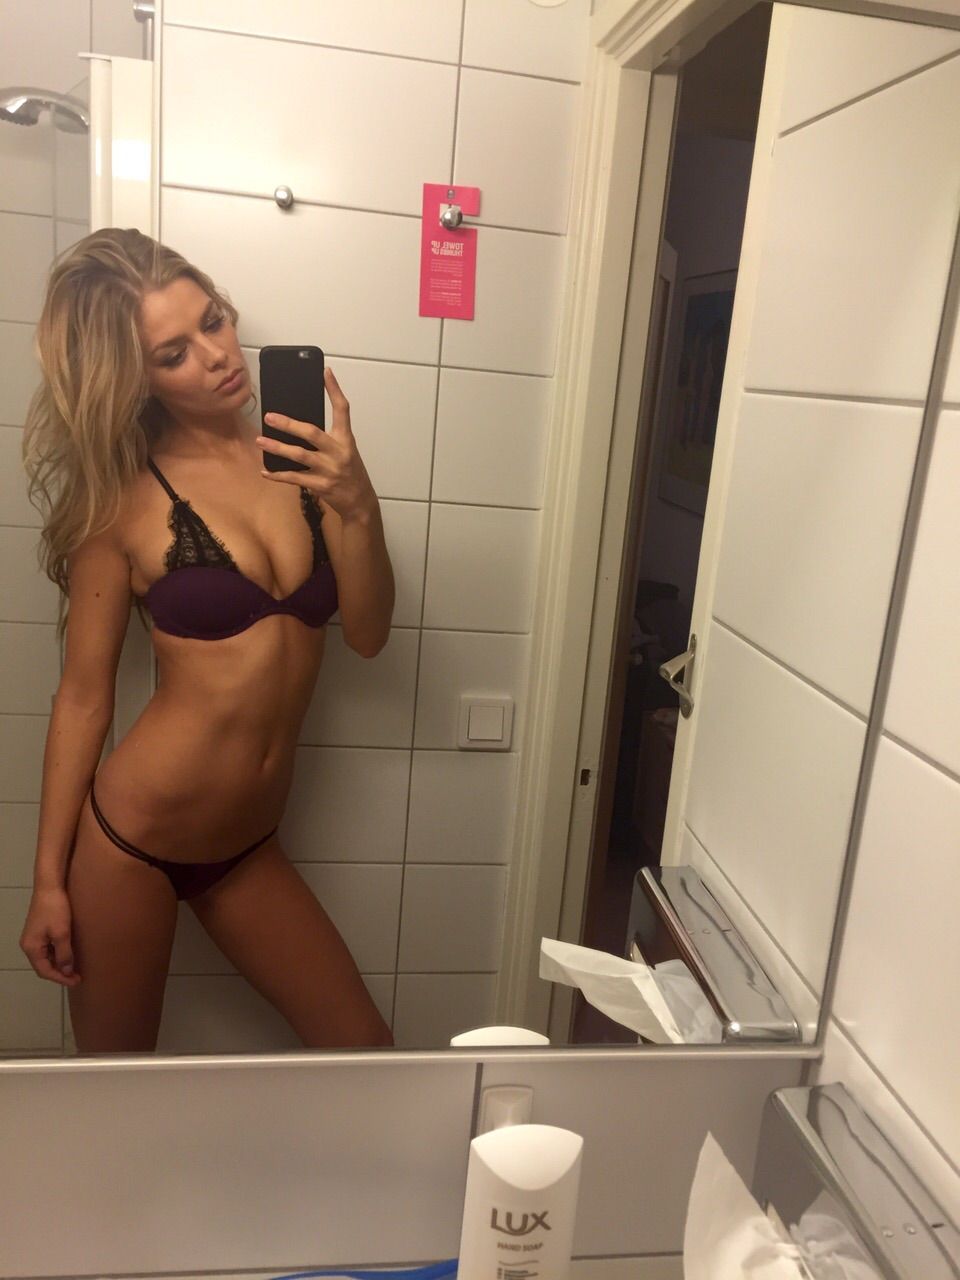 Danielle Knudson Leaks To Shock The World #79522175